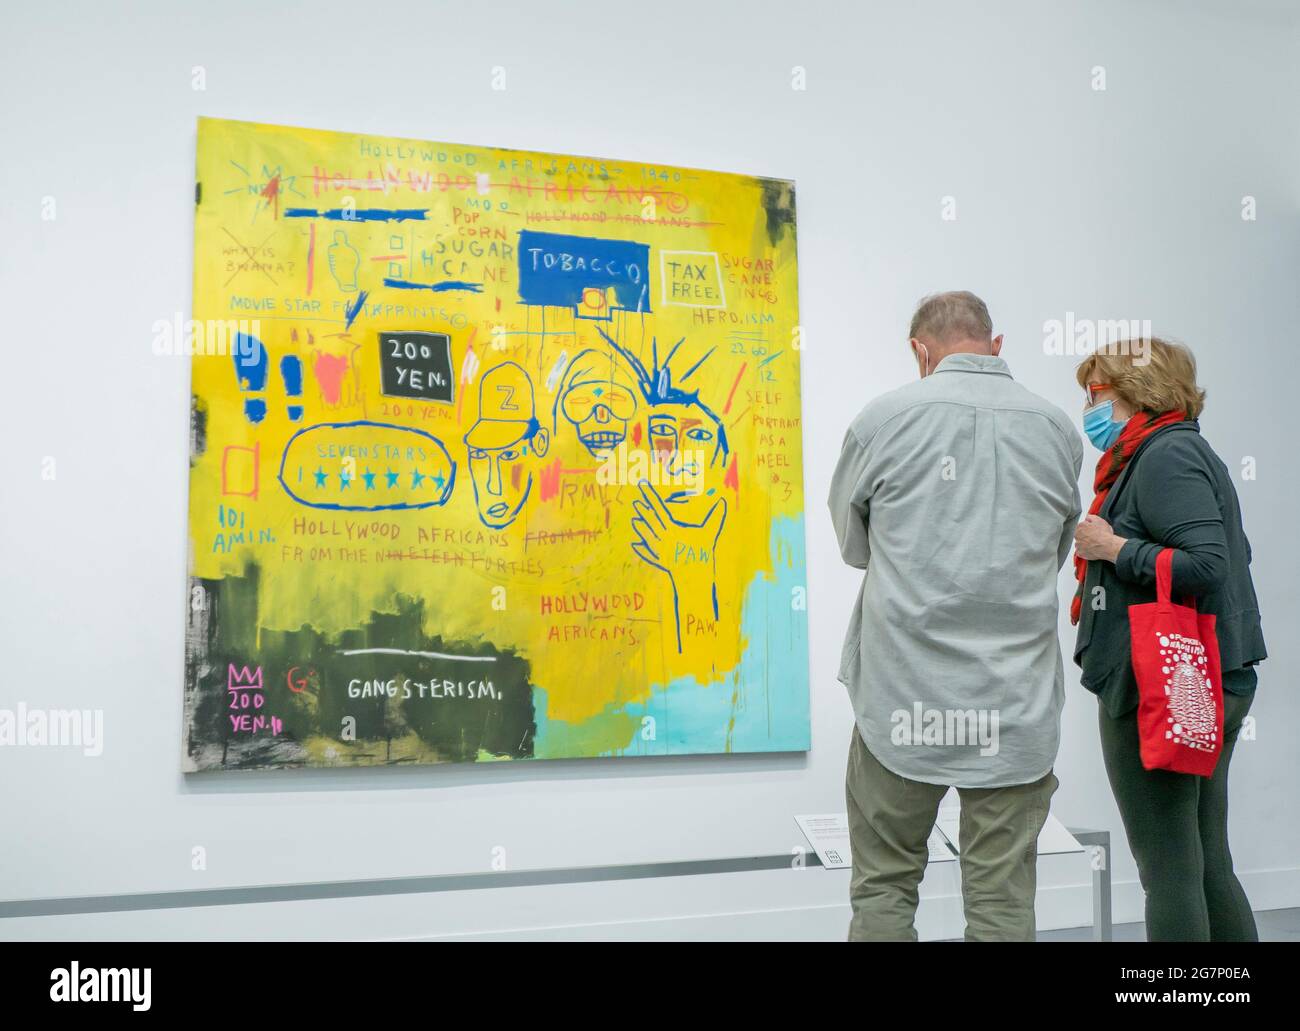 Hollywood Africans by Jean Michel Basquiat in Writing the Future, Basquiat  and the Hip-Hop Generation at the MFA in Boston, Massachusetts Stock Photo  - Alamy